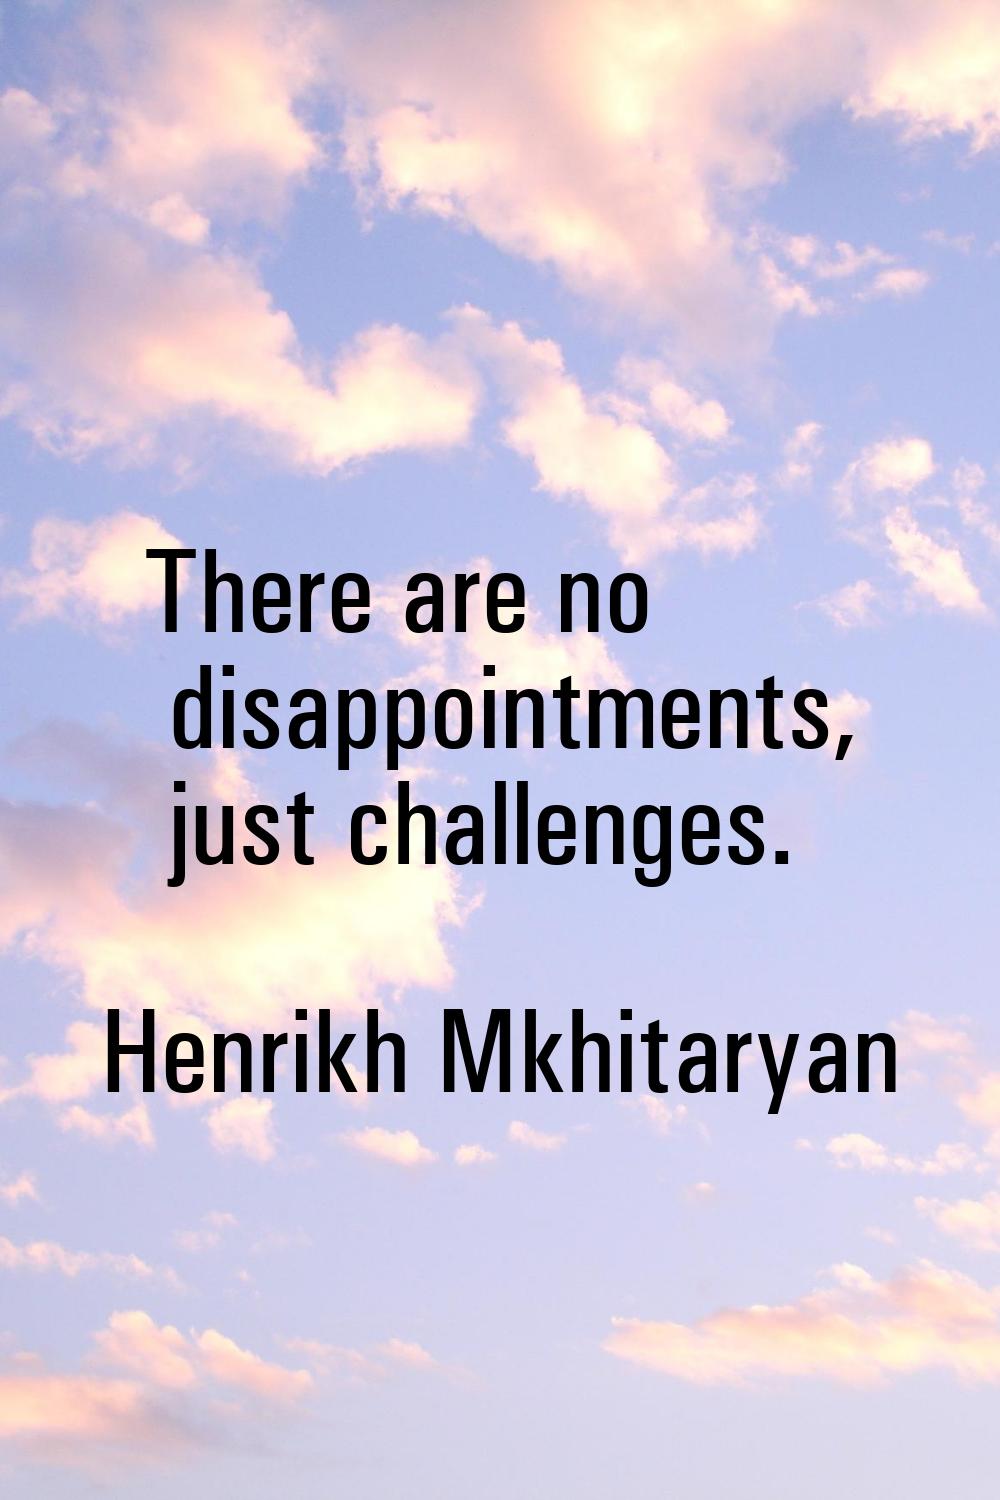 There are no disappointments, just challenges.